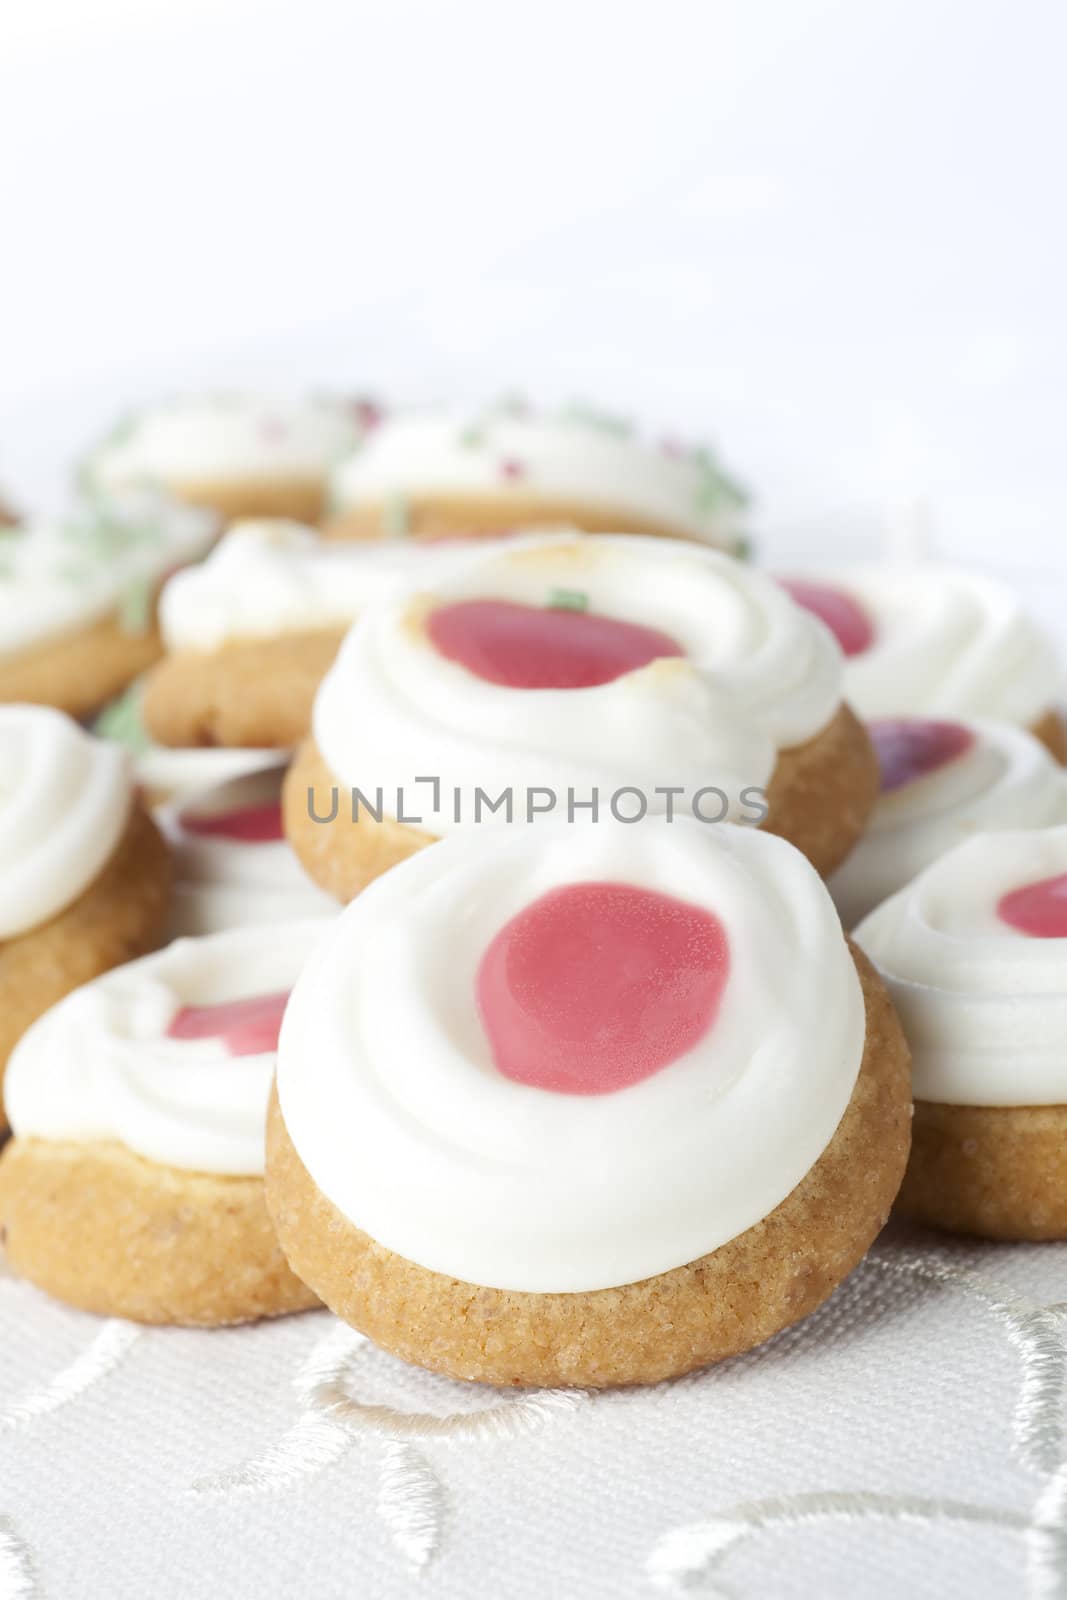 Festive cookies with frosting and decorations.